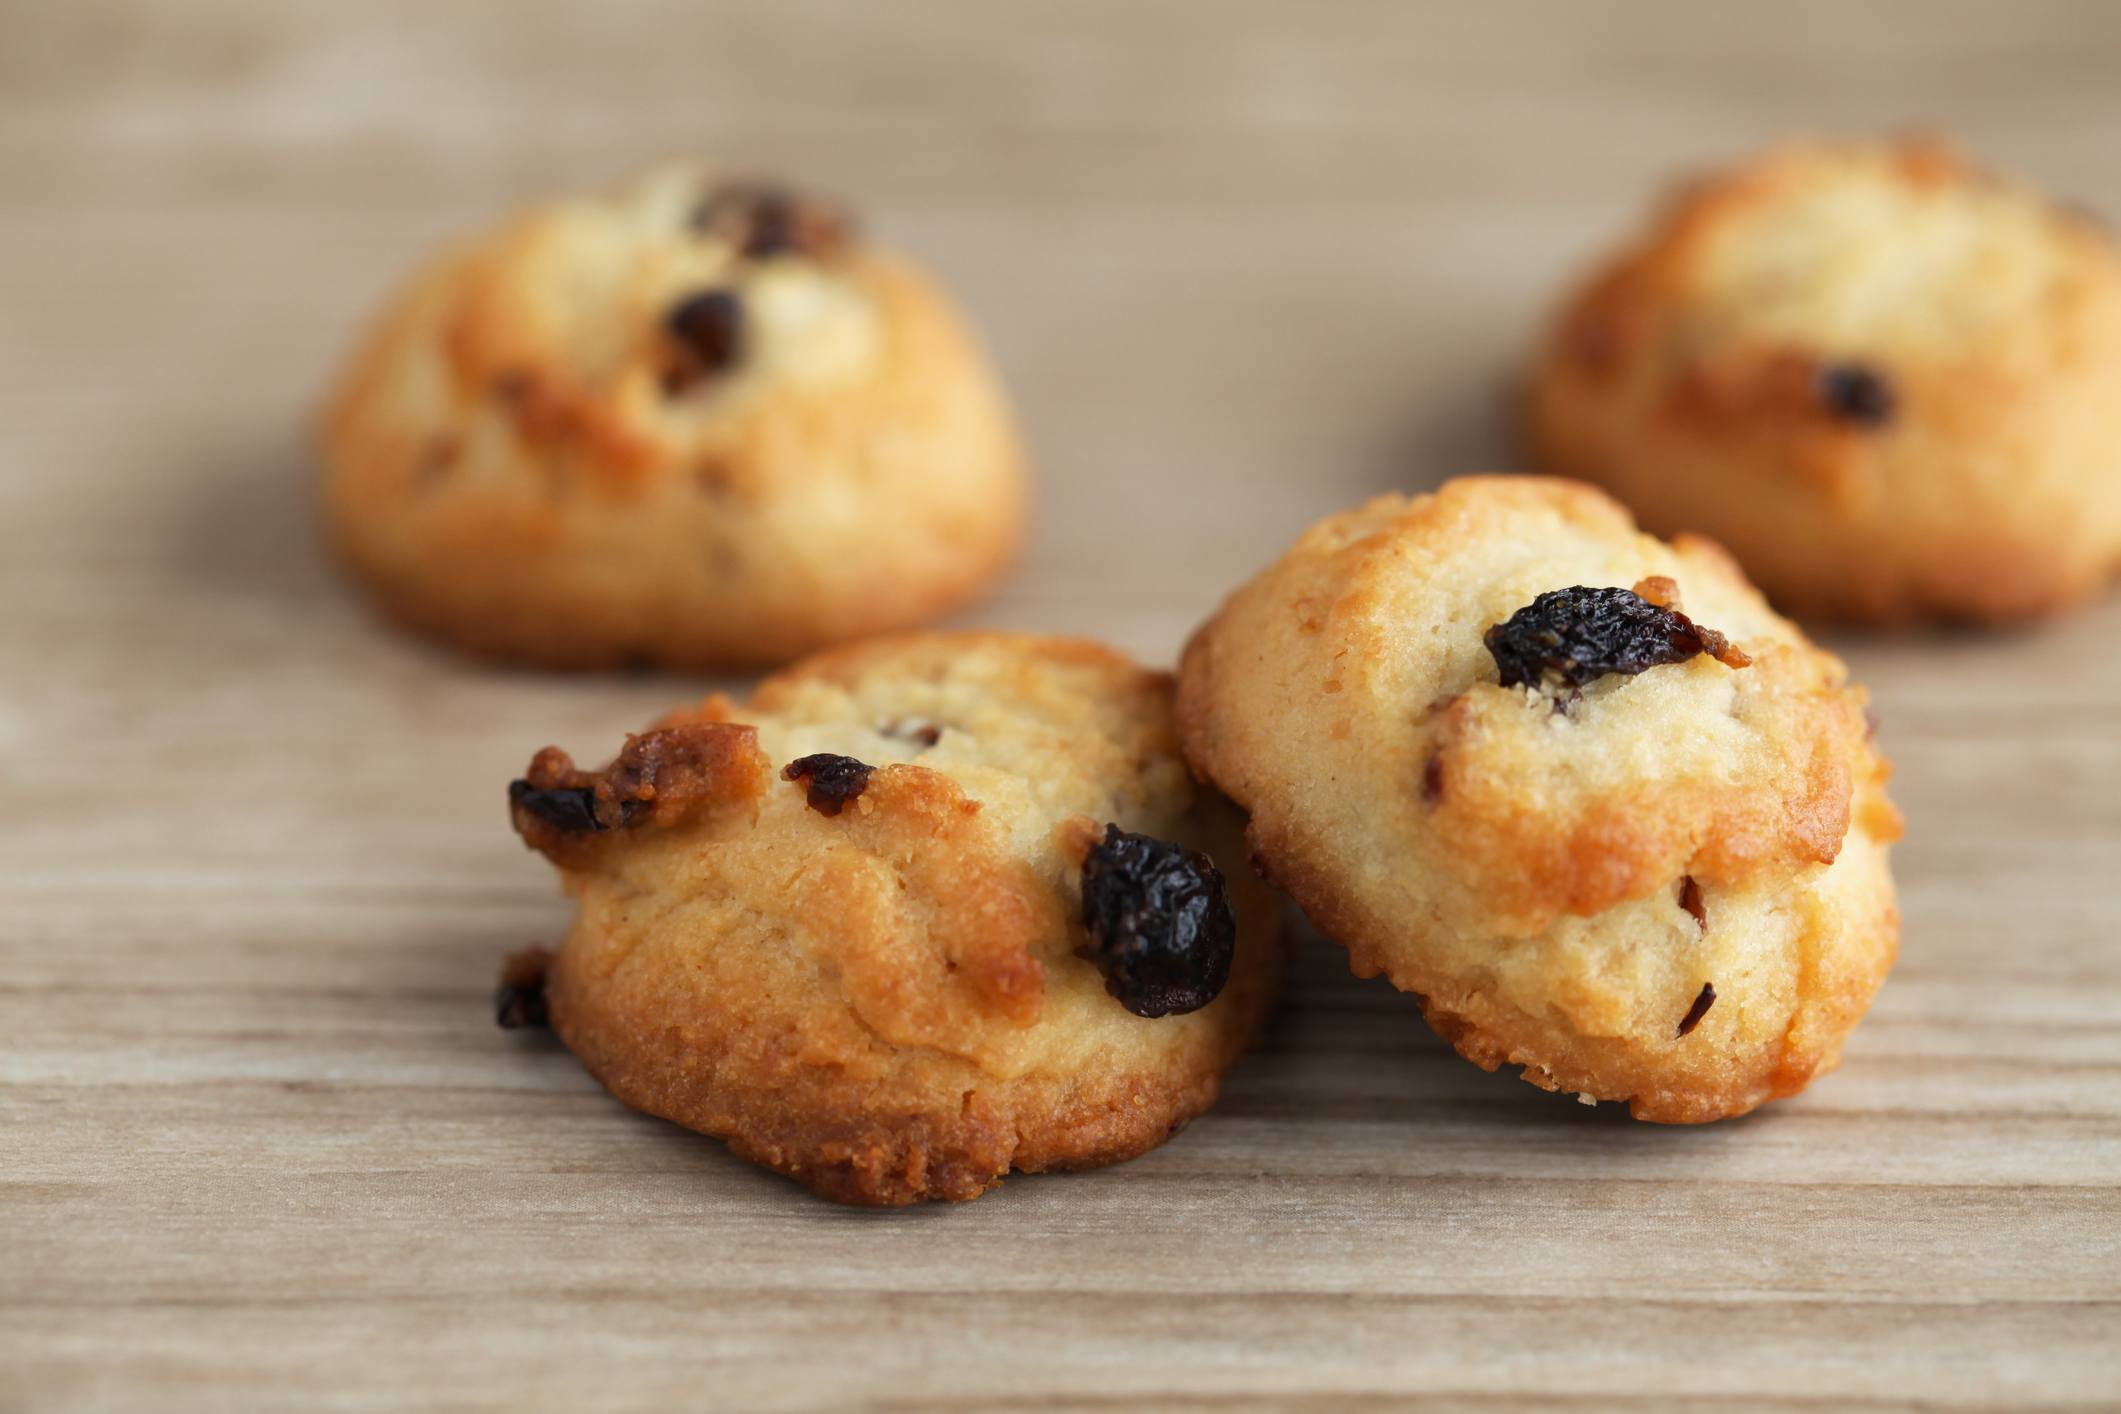 biscuit raisin cookies isolated on wood table